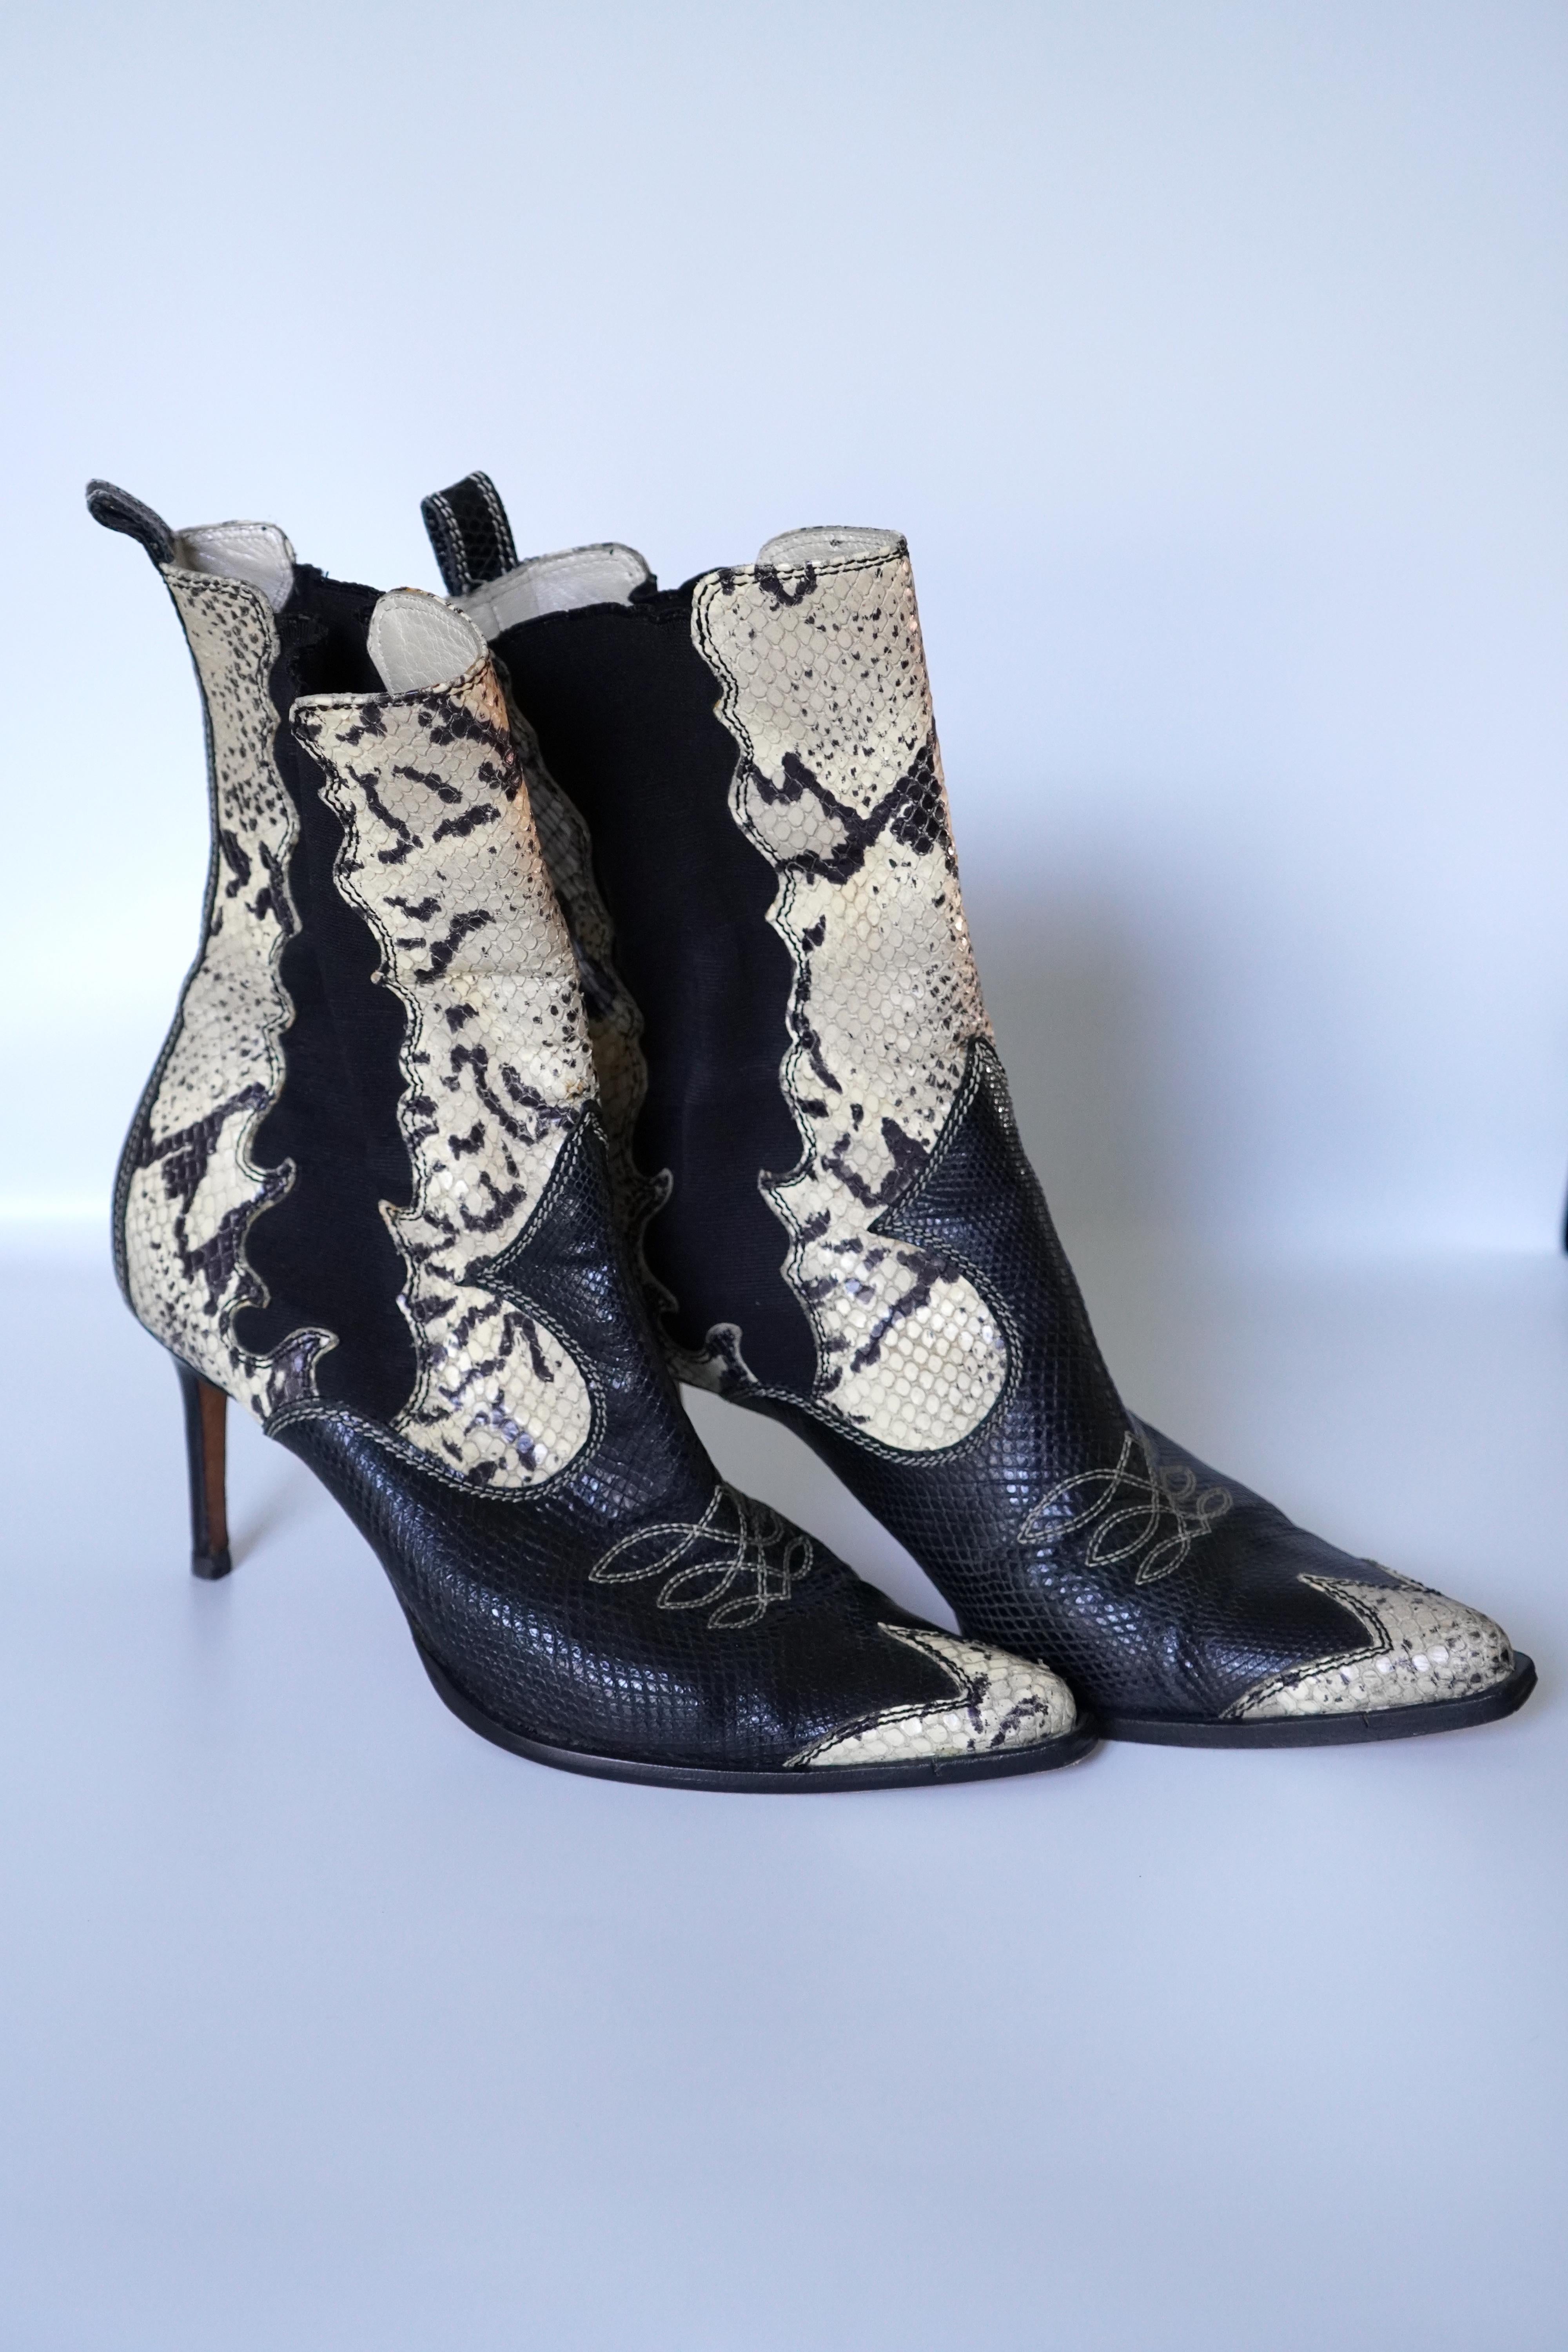 These beautiful Dior boots, featuring a western design and exotic leather. They are slip on boots and feature a 3 inch heel height in a size 38.5. Lightly worn and are in great condition.